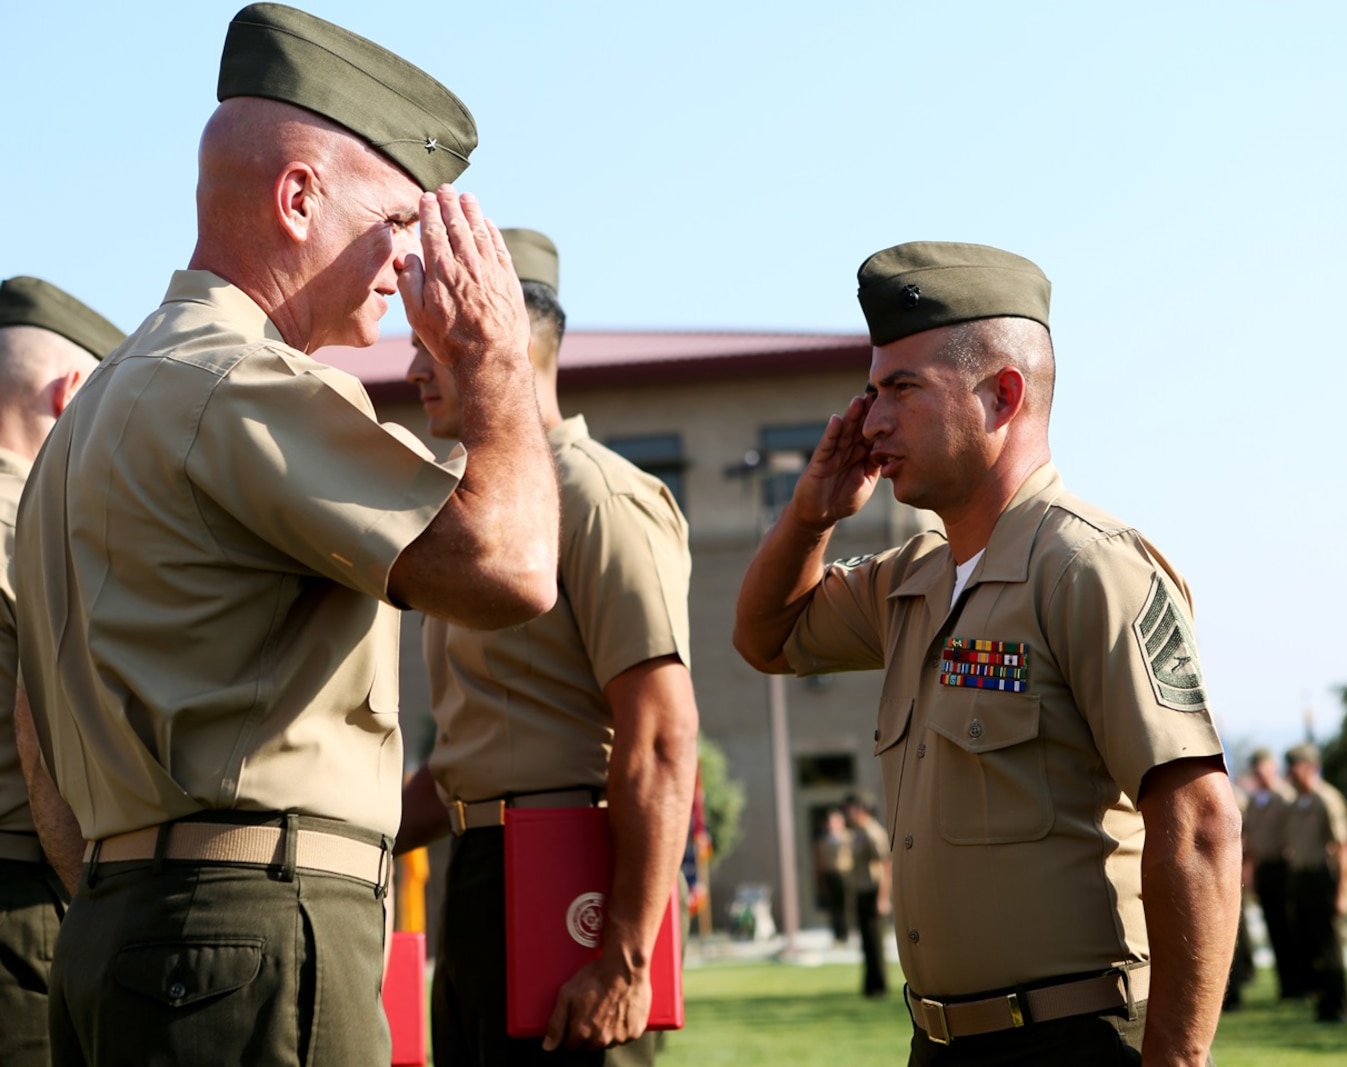 U.S. Marine Gunnery Sgt. Pablo Hernandez renders a salute to Brig. Gen. David A. Ottignon at the 1st Marine Logistics Group quarterly awards ceremony aboard Camp Pendleton Calif., July 29, 2016. Ottignon is the 1st MLG commanding general and Hernandez is an operations chief at 7th Engineer Support Battalion. Hernandez was one of the Marines recognized at the ceremony for their outstanding achievements in the performance of their duties for the fiscal year 2016 third quarter. (U.S. Marine Corps photo by Sgt. Carson Gramley/released)